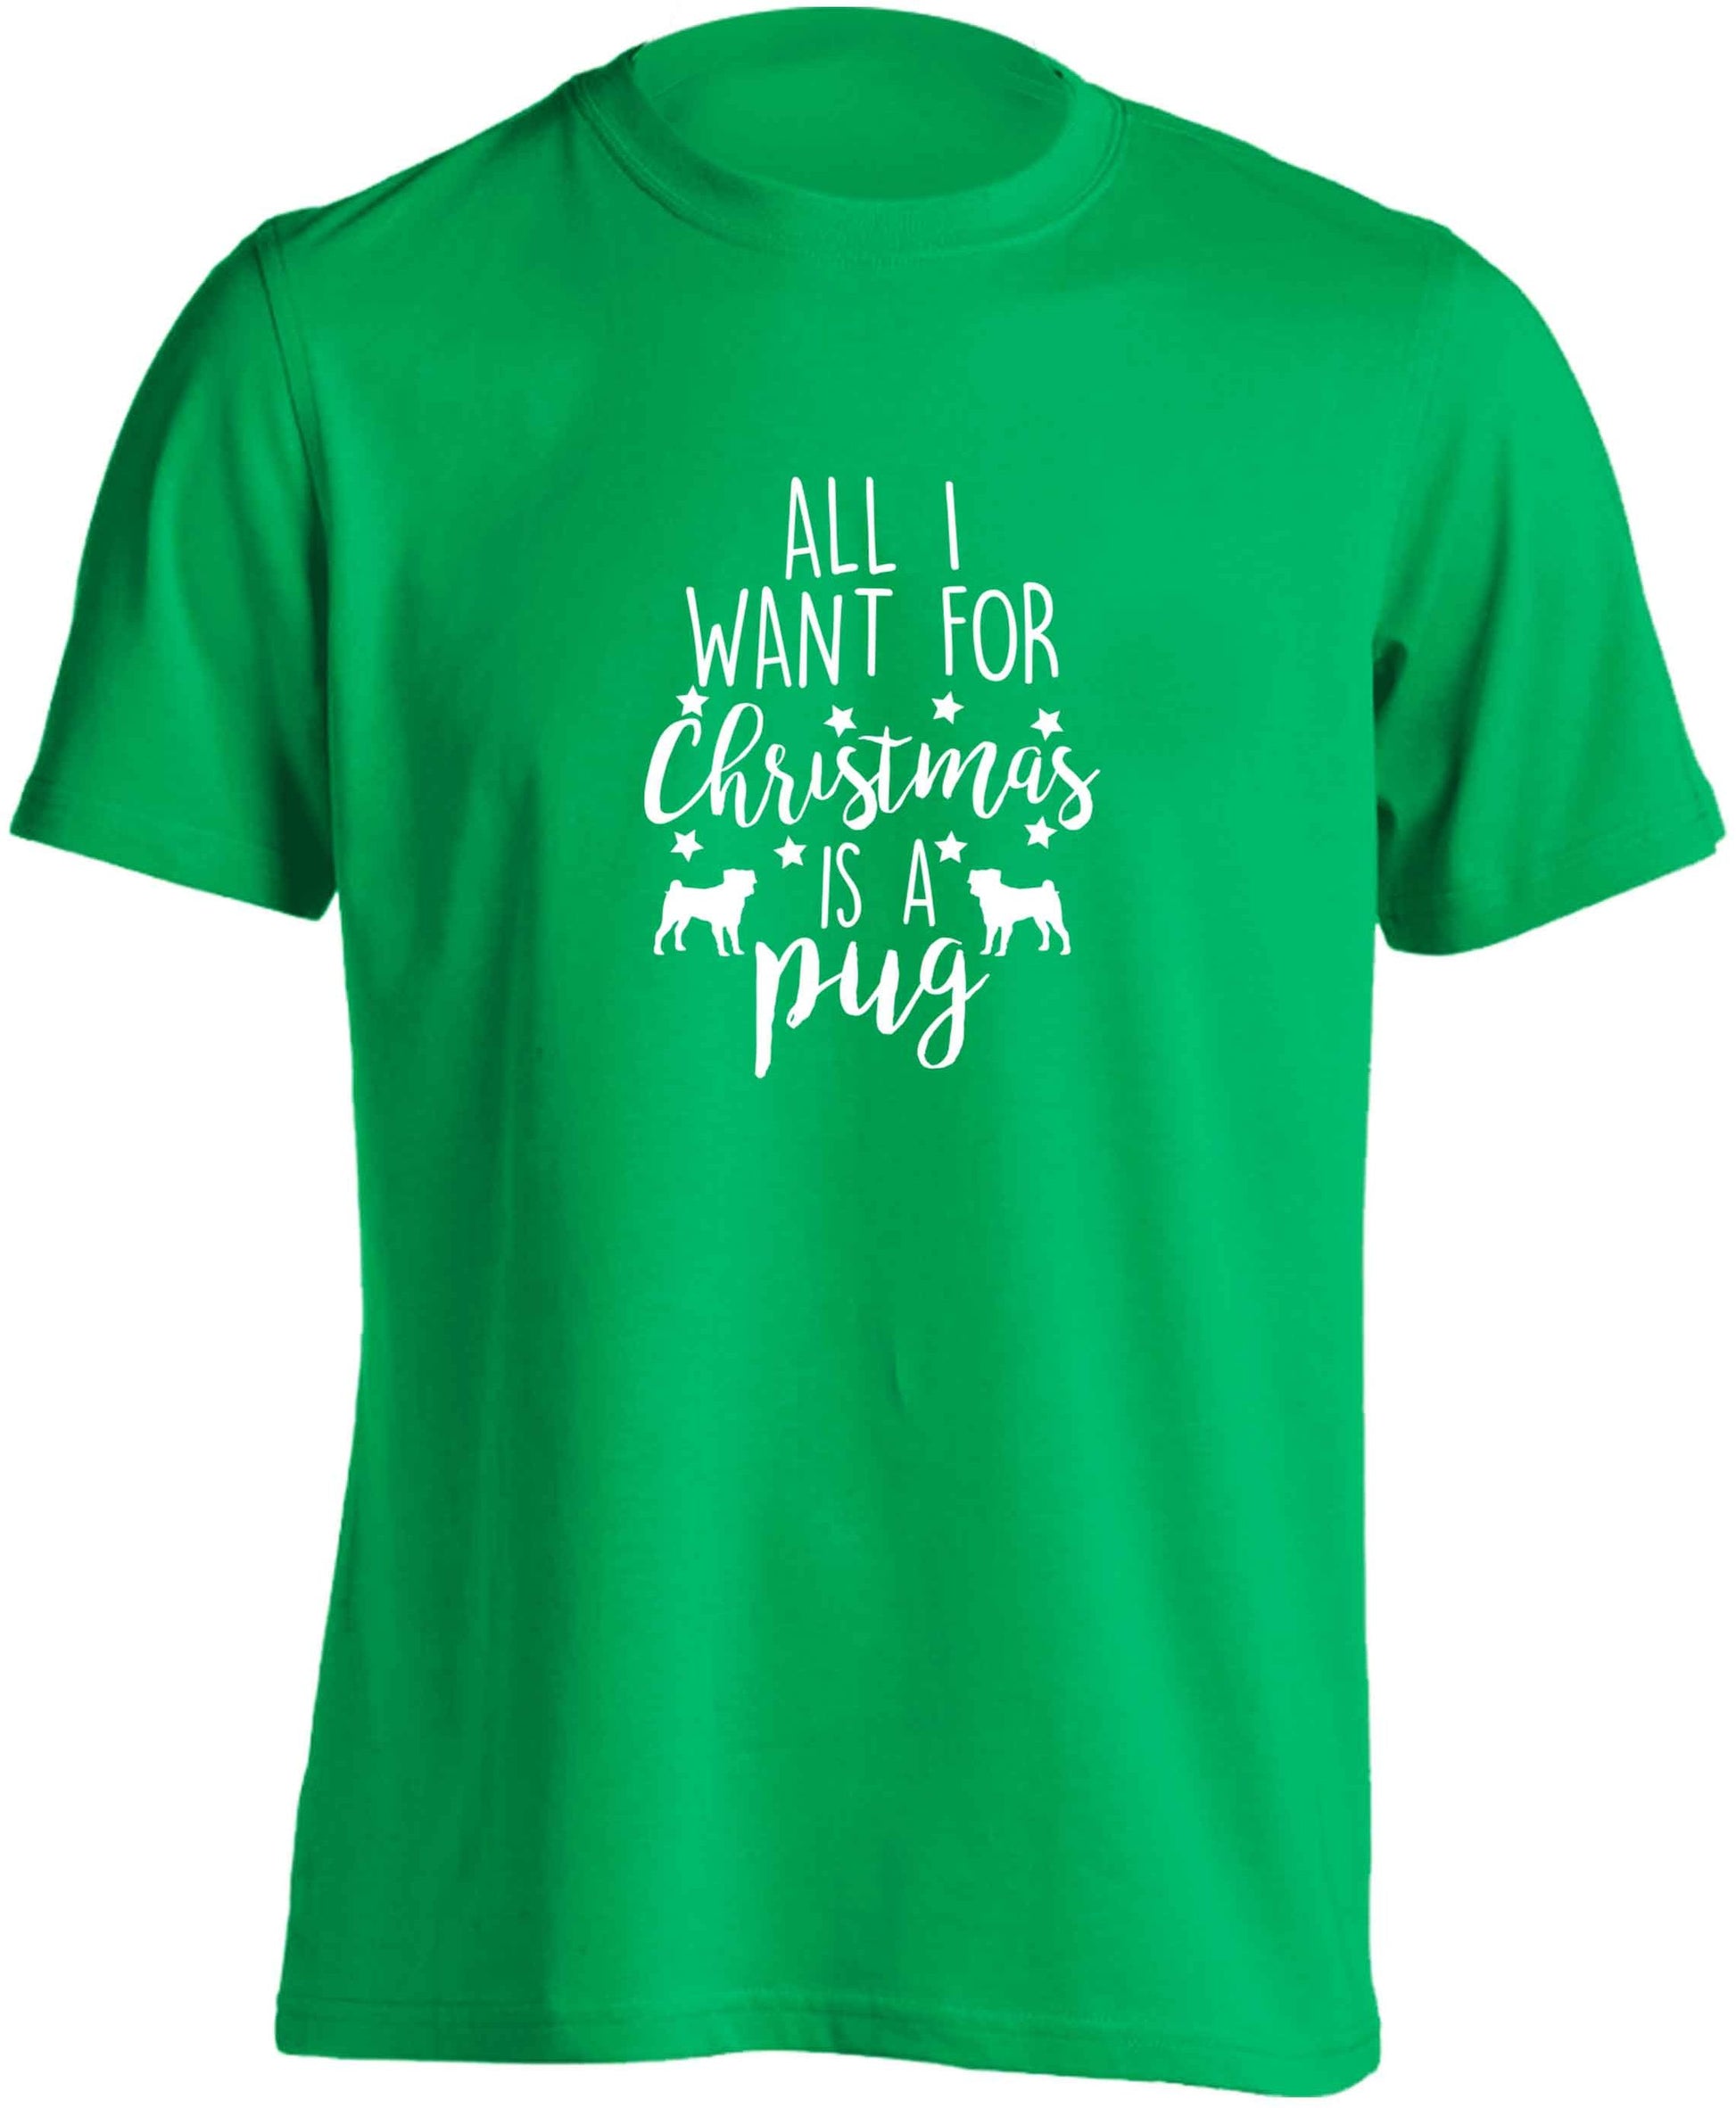 All I want for Christmas is a pug adults unisex green Tshirt 2XL